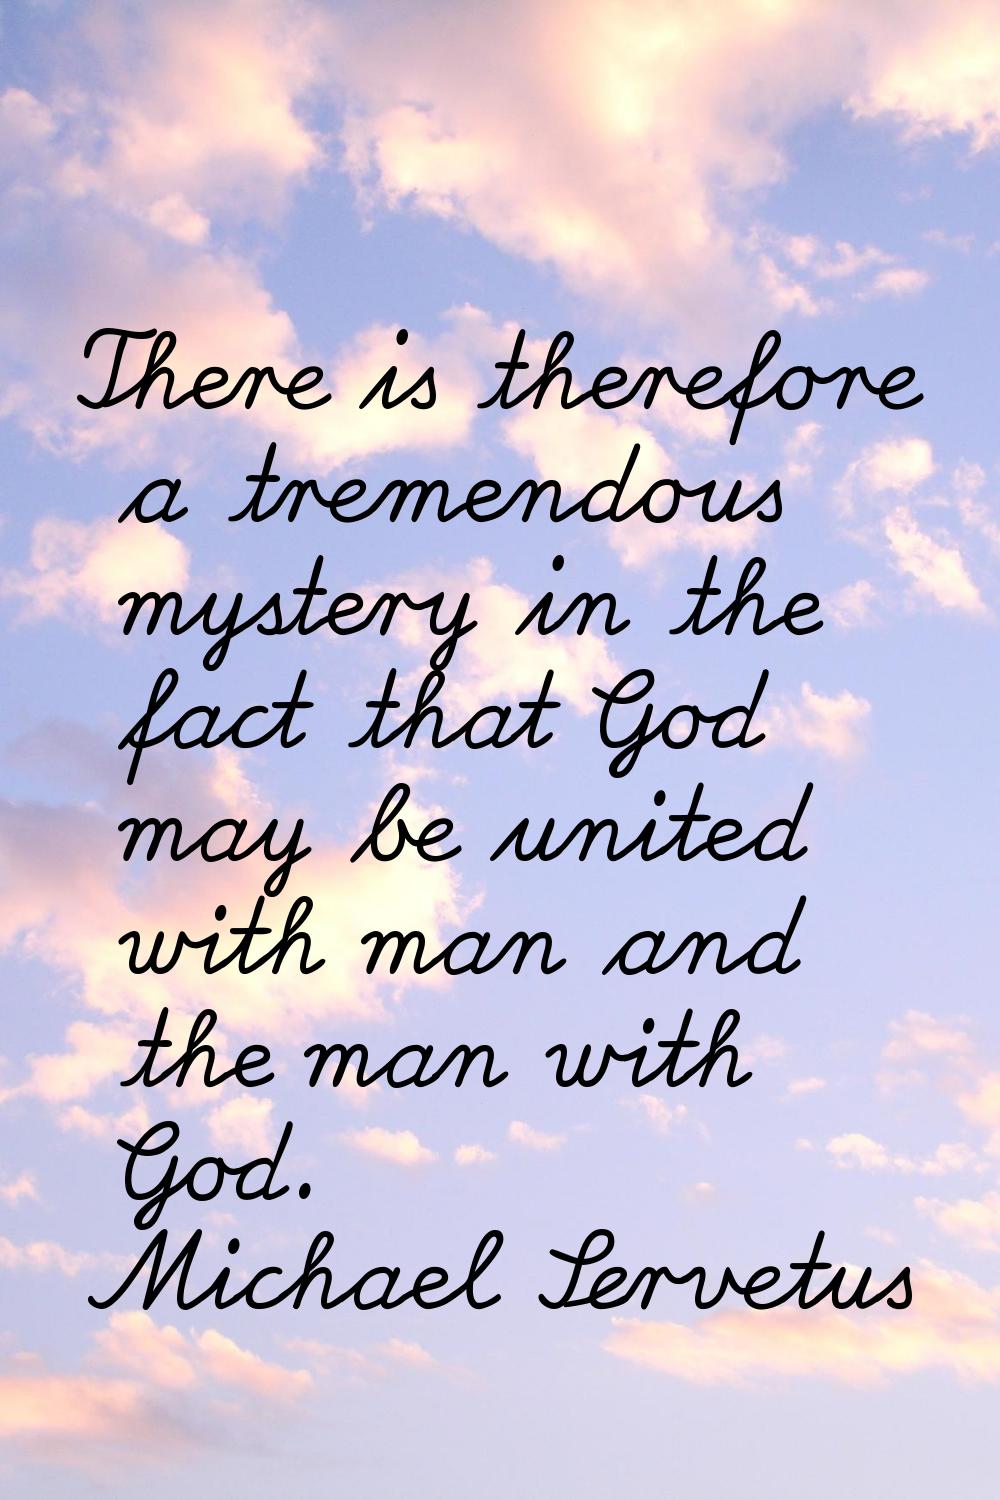 There is therefore a tremendous mystery in the fact that God may be united with man and the man wit